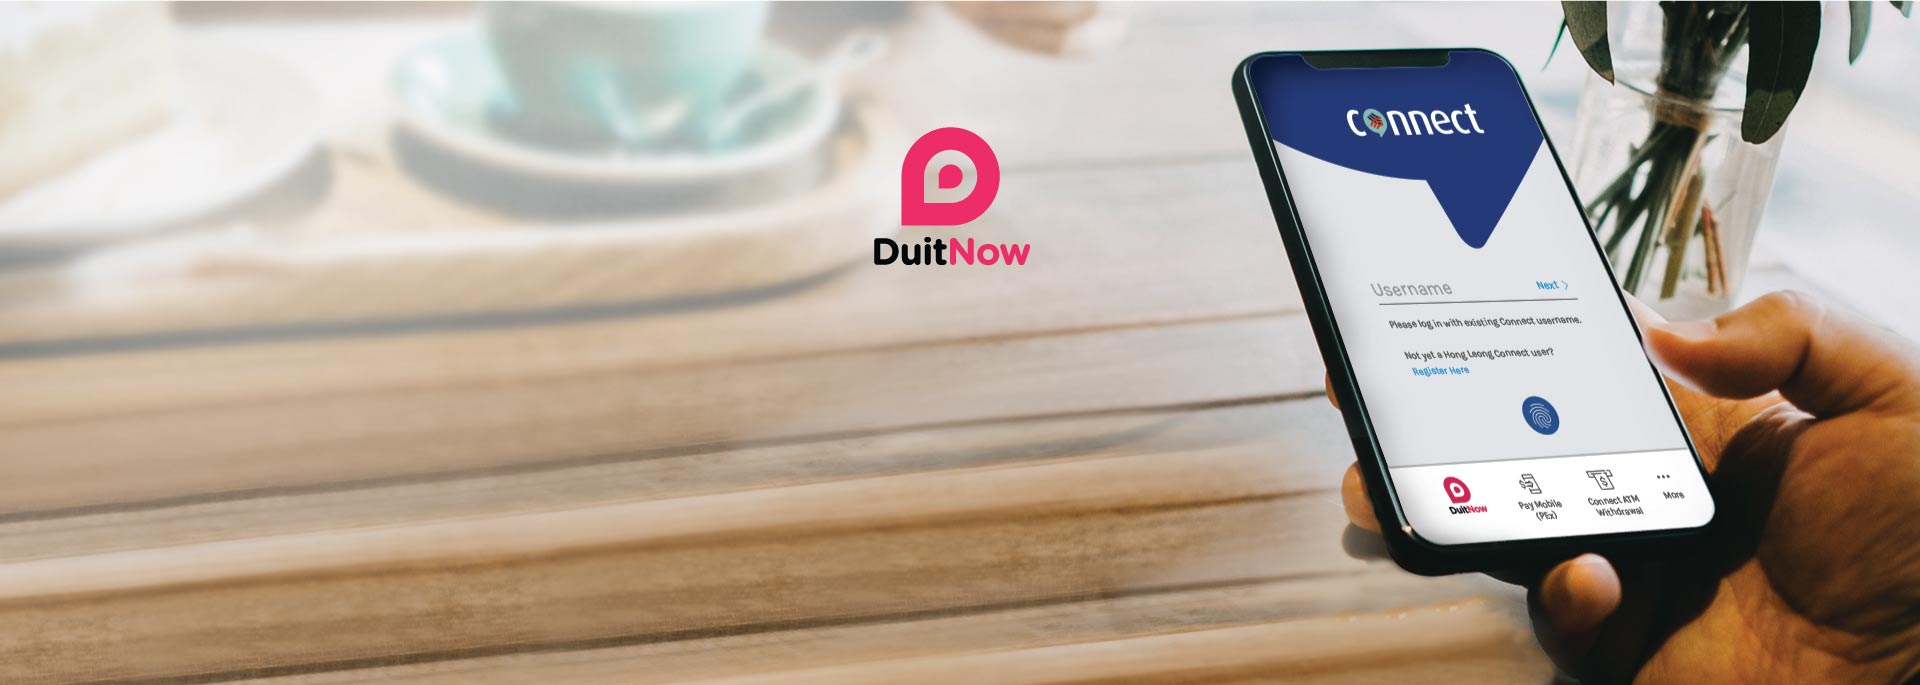 duitnow banner new